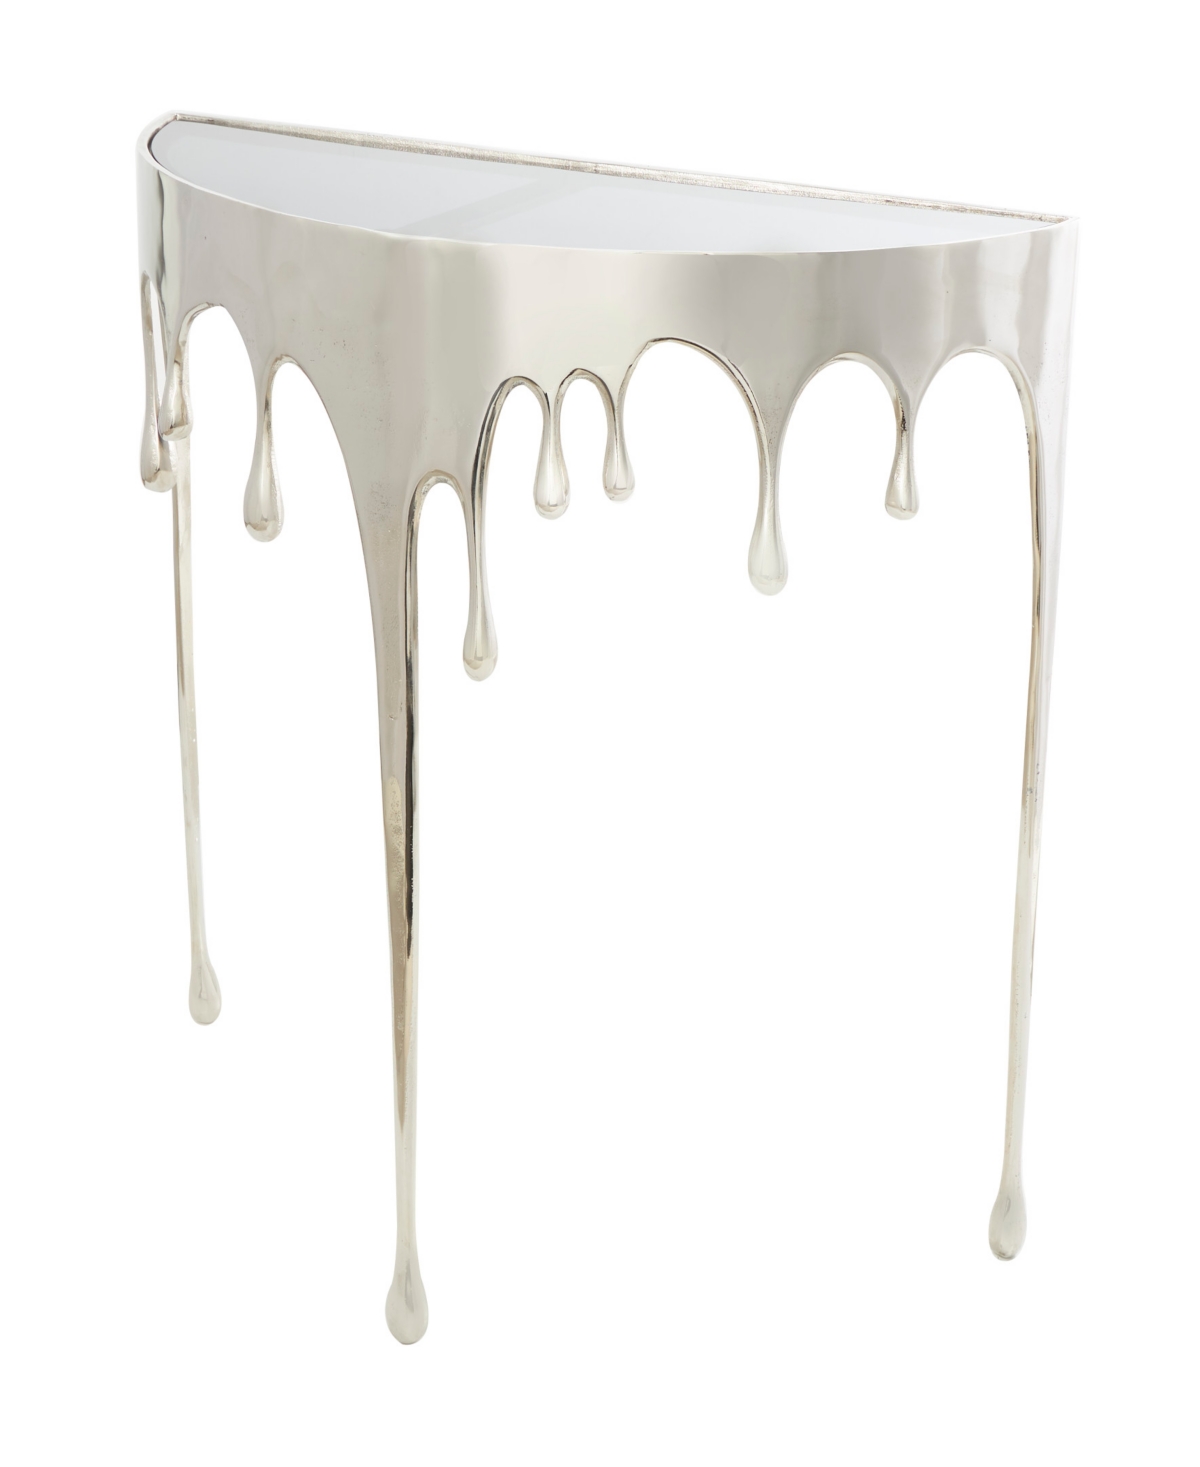 Rosemary Lane Aluminum Drip Console Table With Melting Designed Legs And Shaded Glass Top, 36" X 14" X 32" In Silver